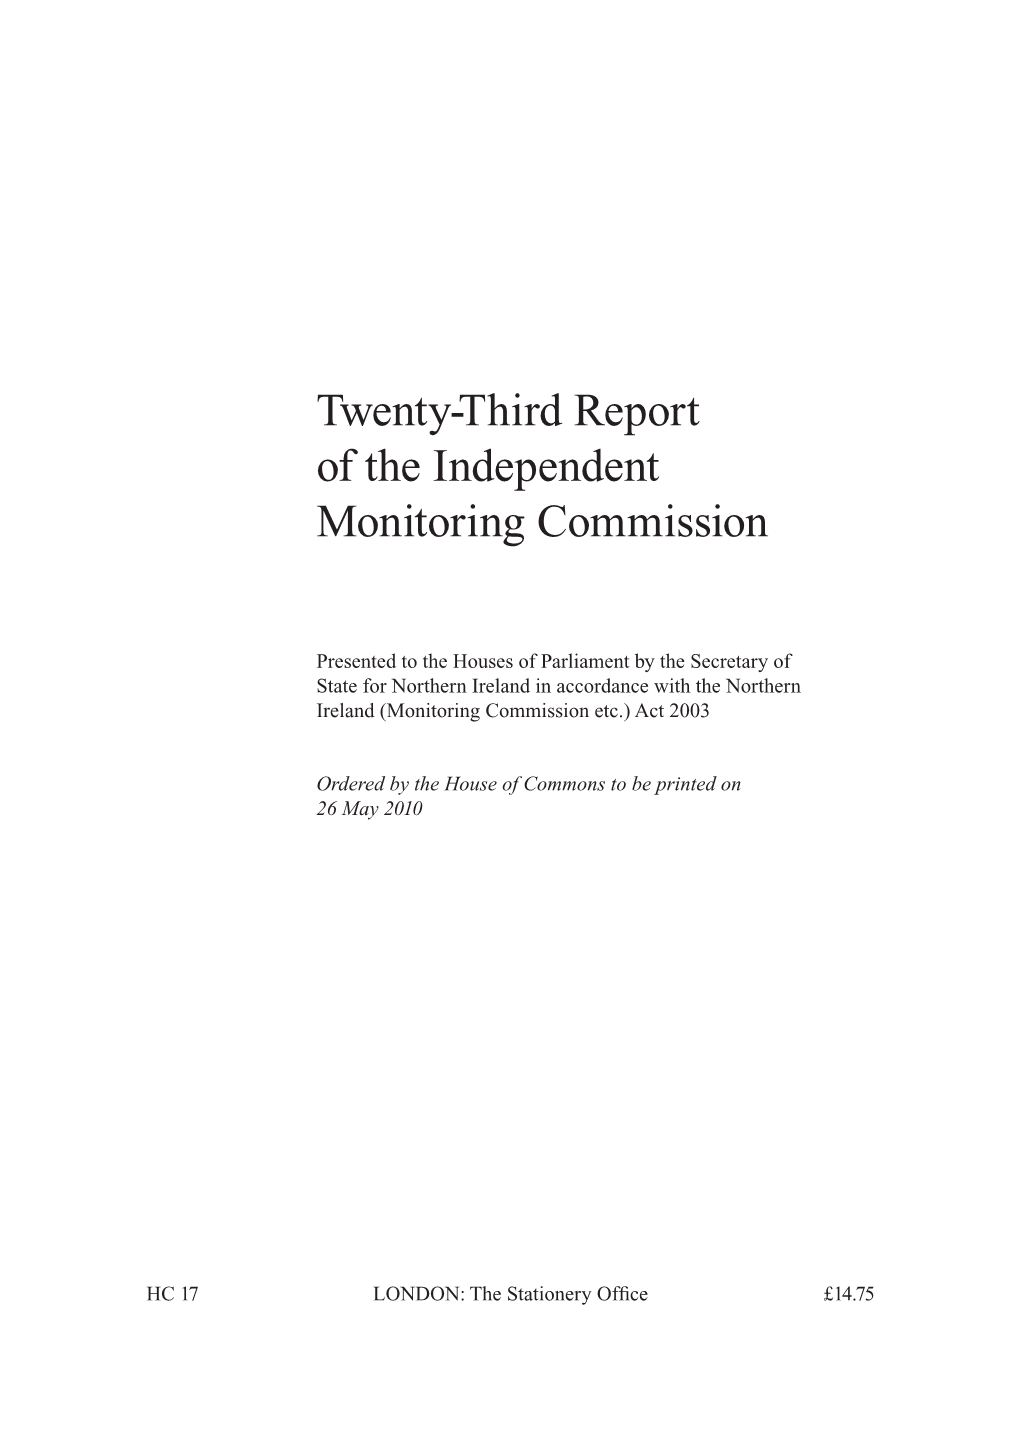 Twenty-Third Report of the Independent Monitoring Commission